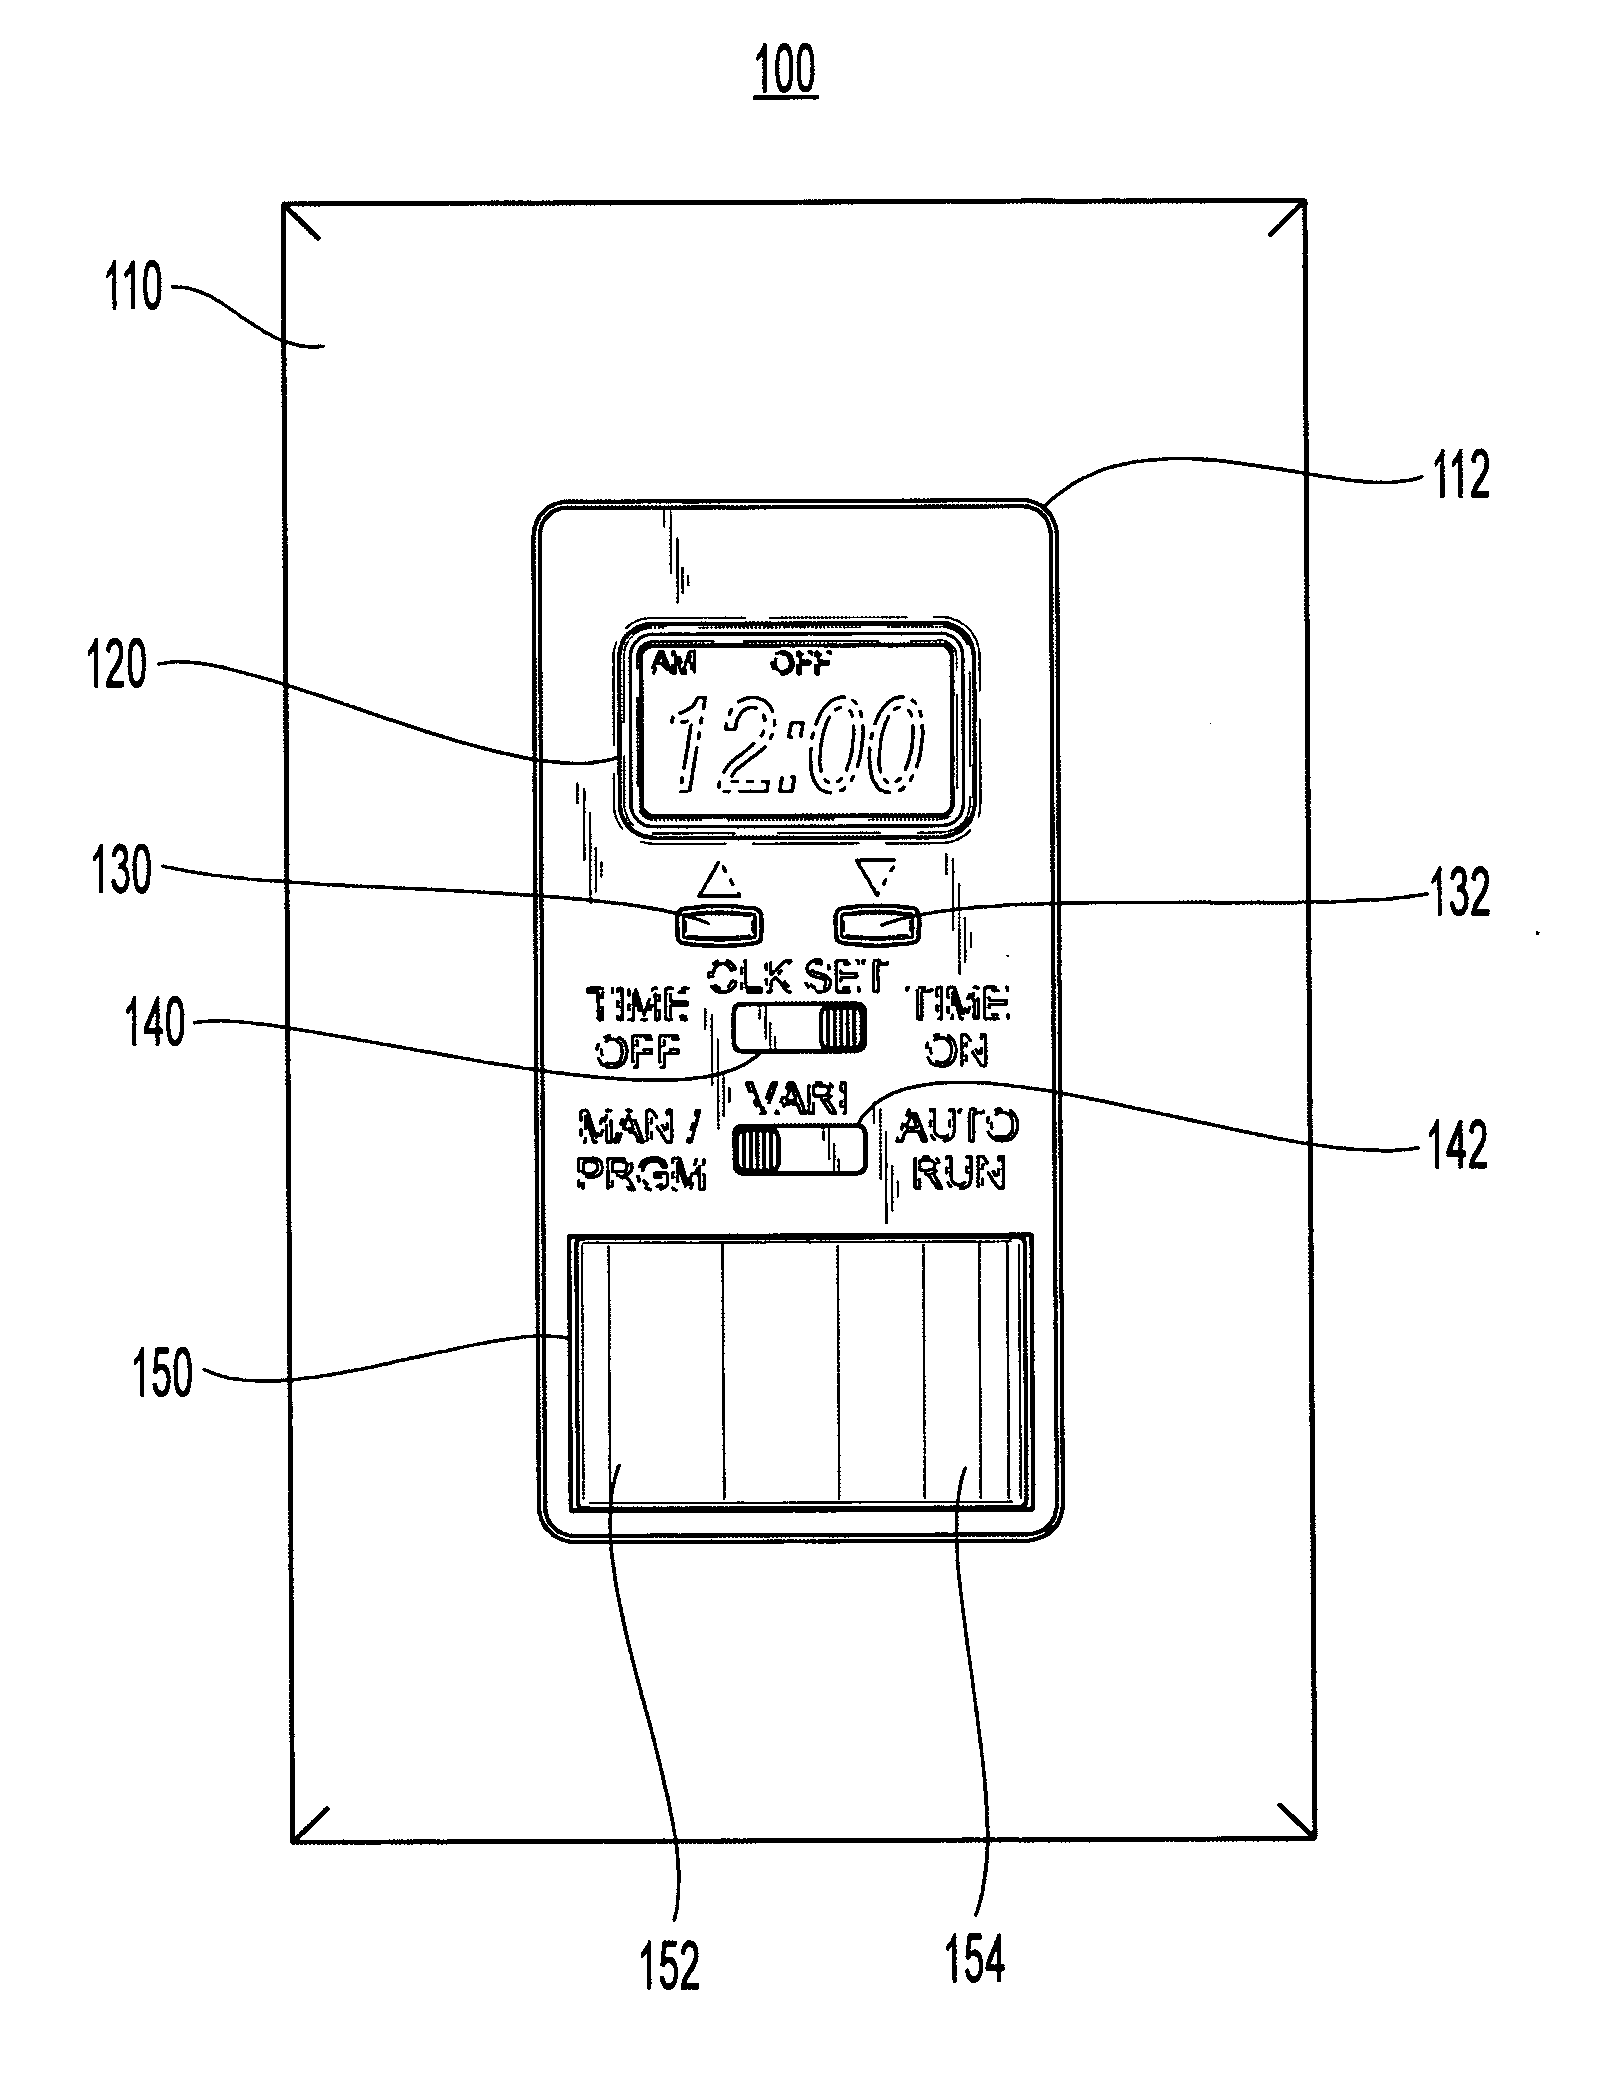 Automatic and manual wall switch device